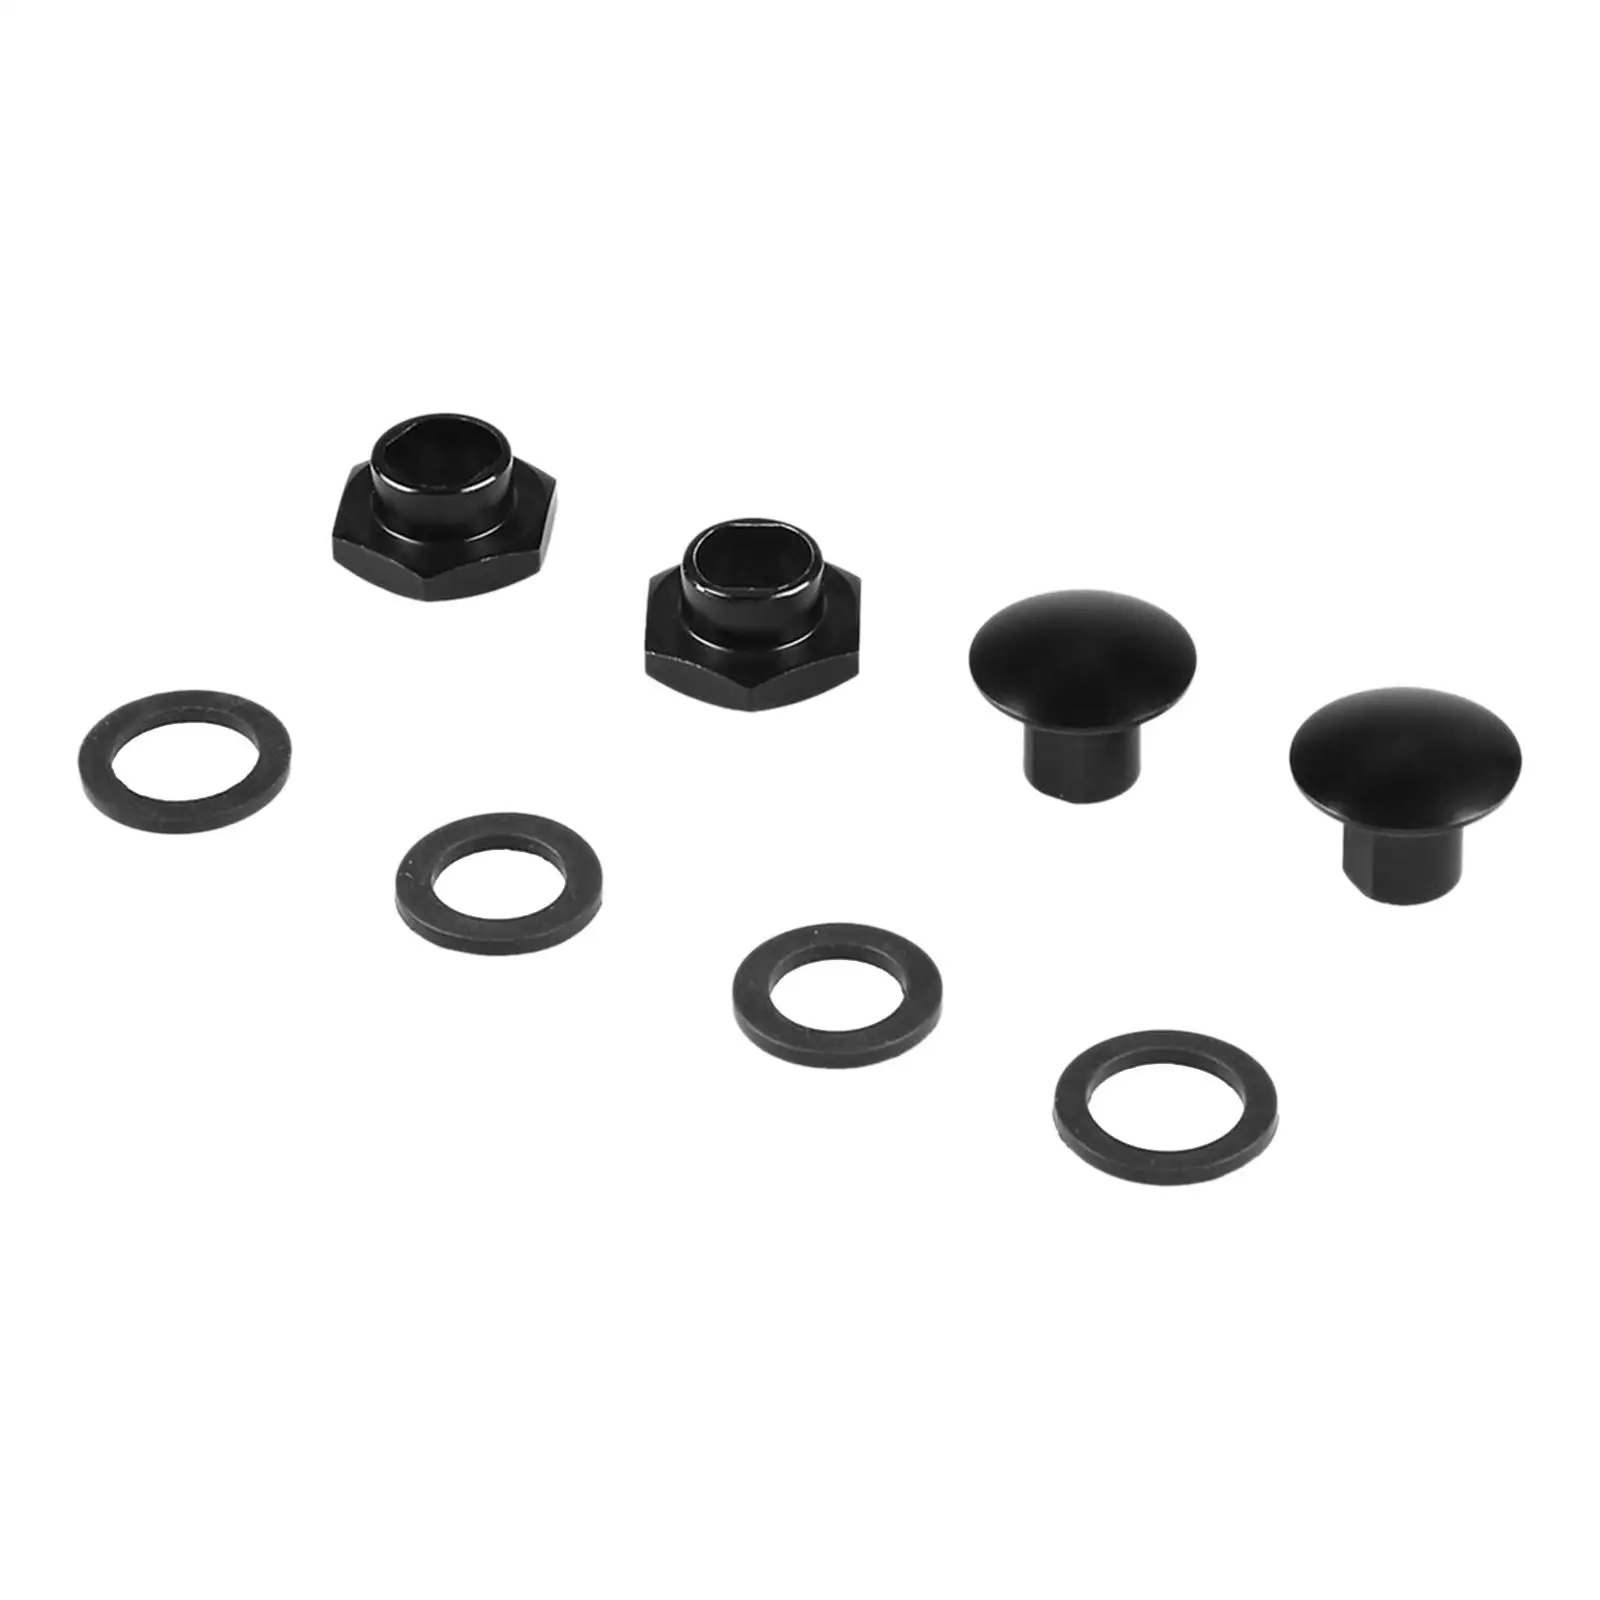 Rear Glass Strut Hardware Kit Fit for Honda Civic 3DR Replaces Professional